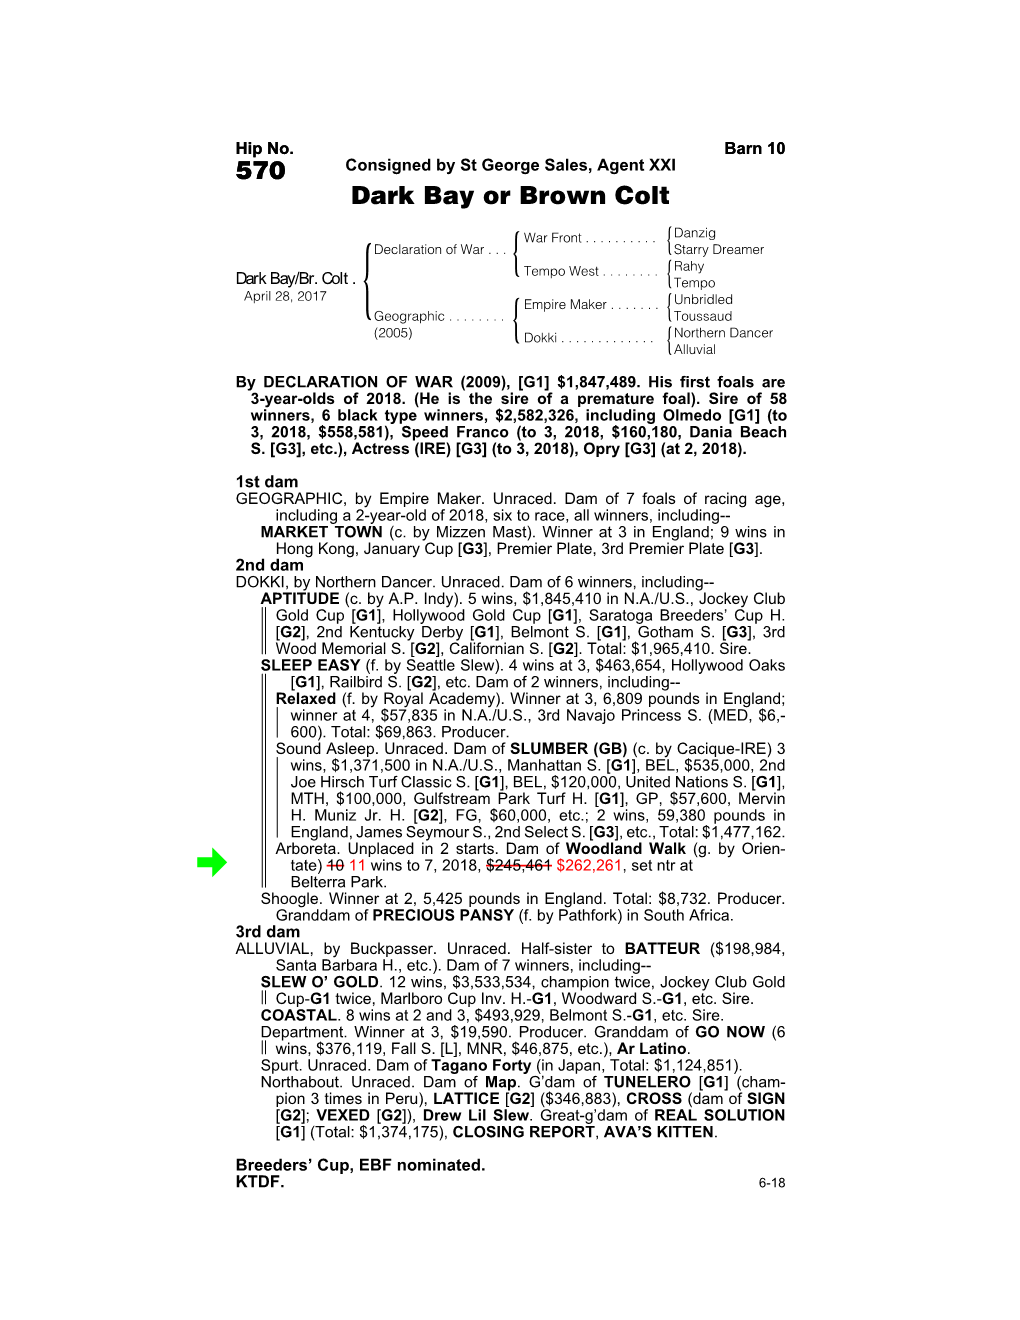 570 Consigned by St George Sales, Agent XXI Dark Bay Or Brown Colt